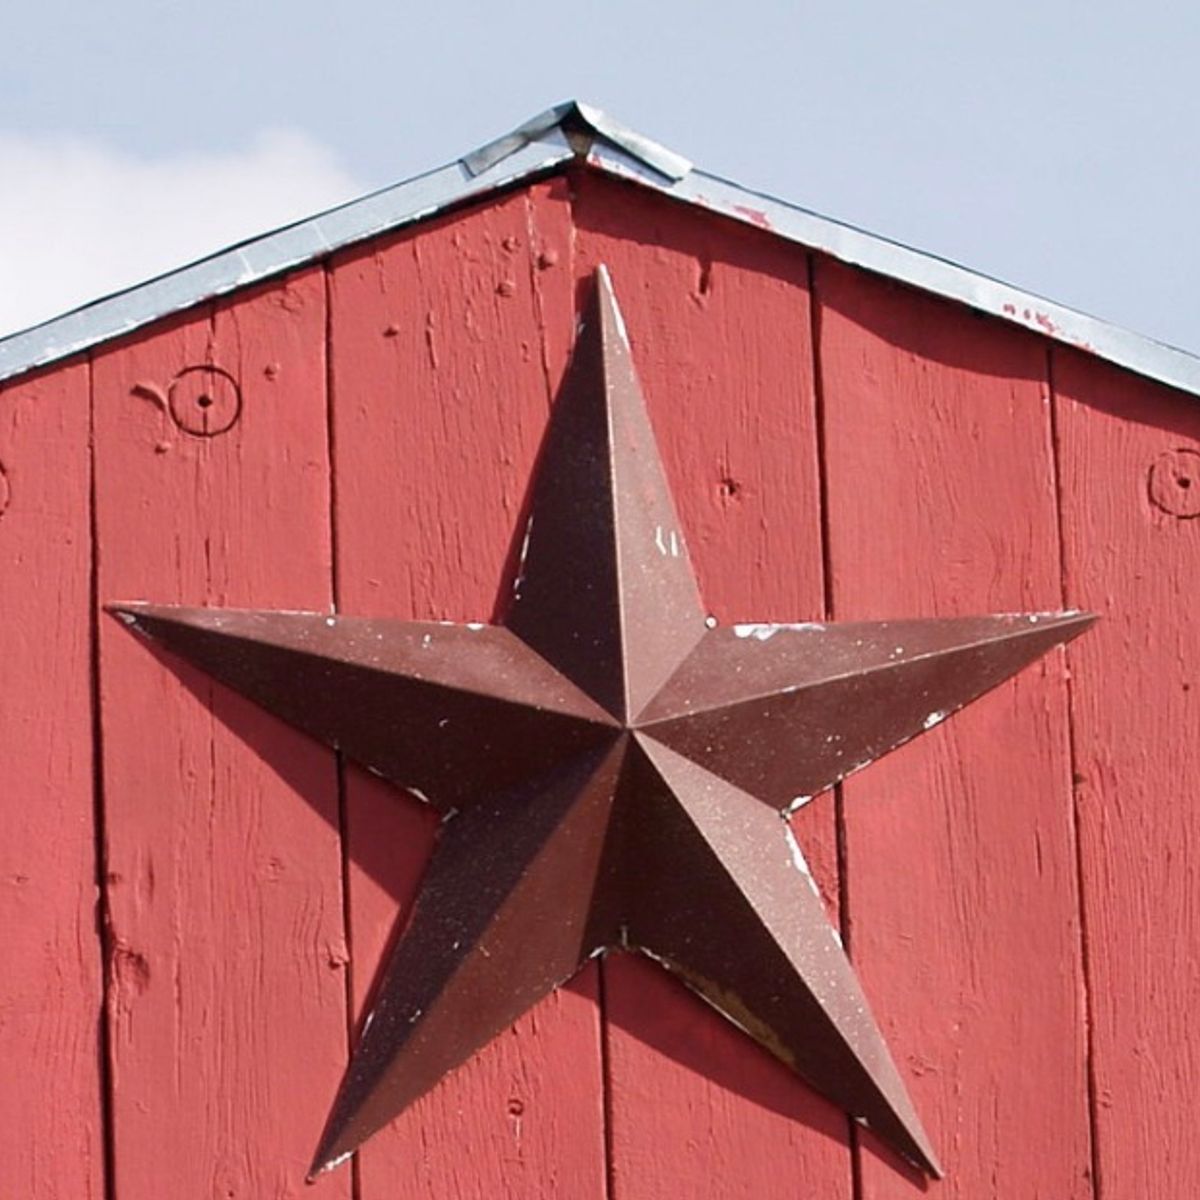 Five-pointed stars decorating the exteriors of houses mean the inhabitants